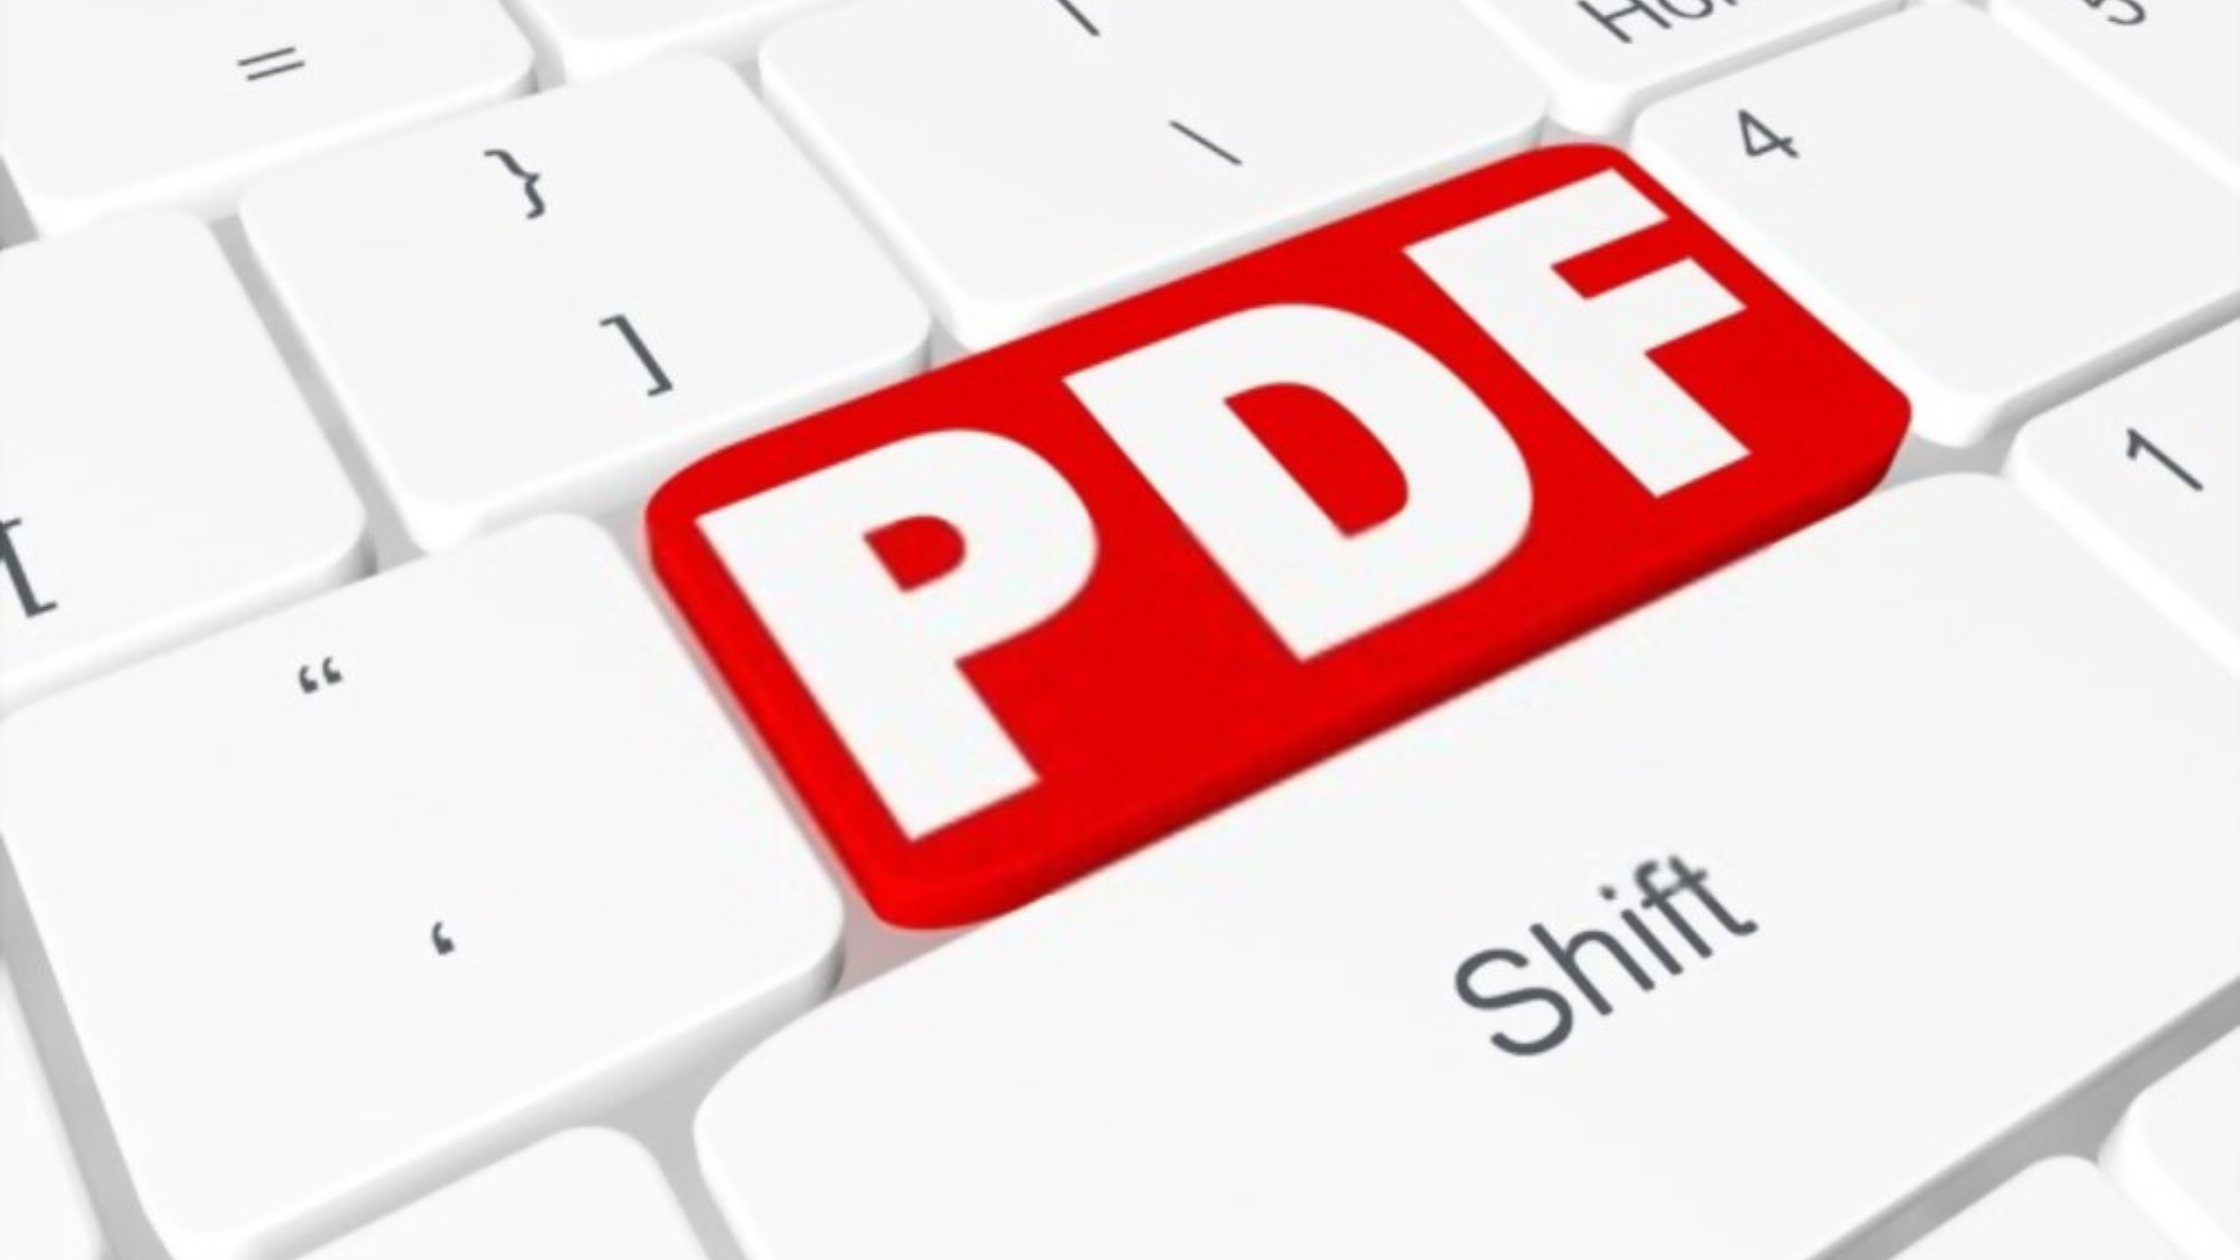 How to create a fillable pdf without Adobe Acrobat